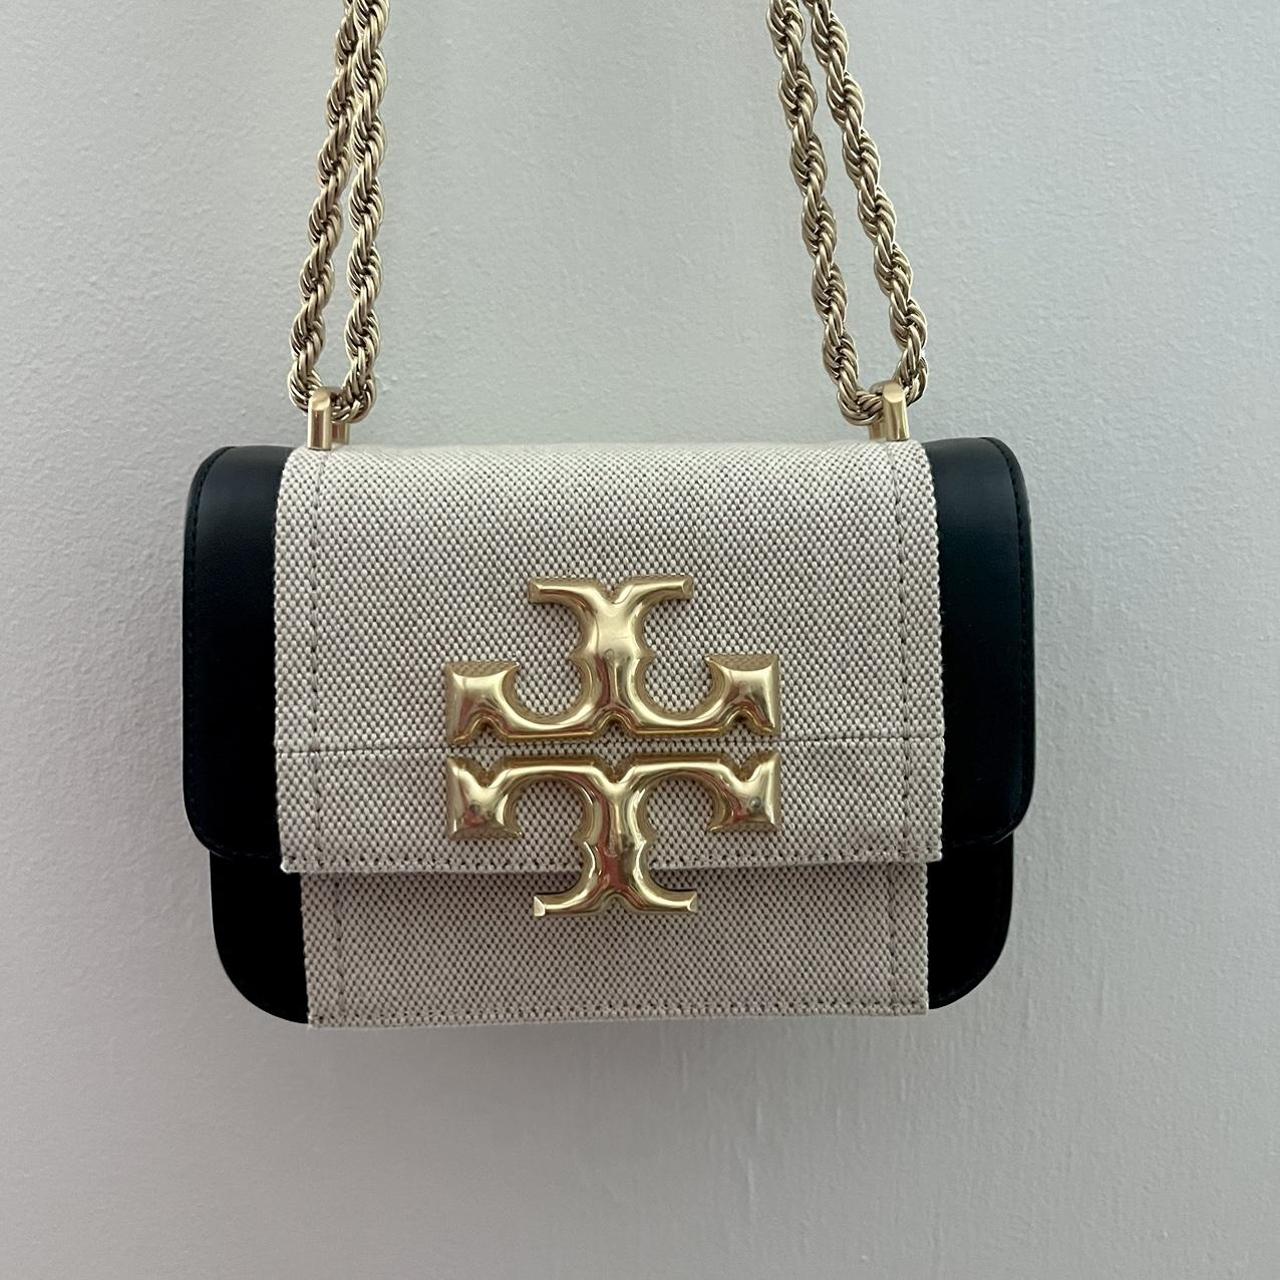 Tory Burch Leather Gold Chain Purse. - Depop